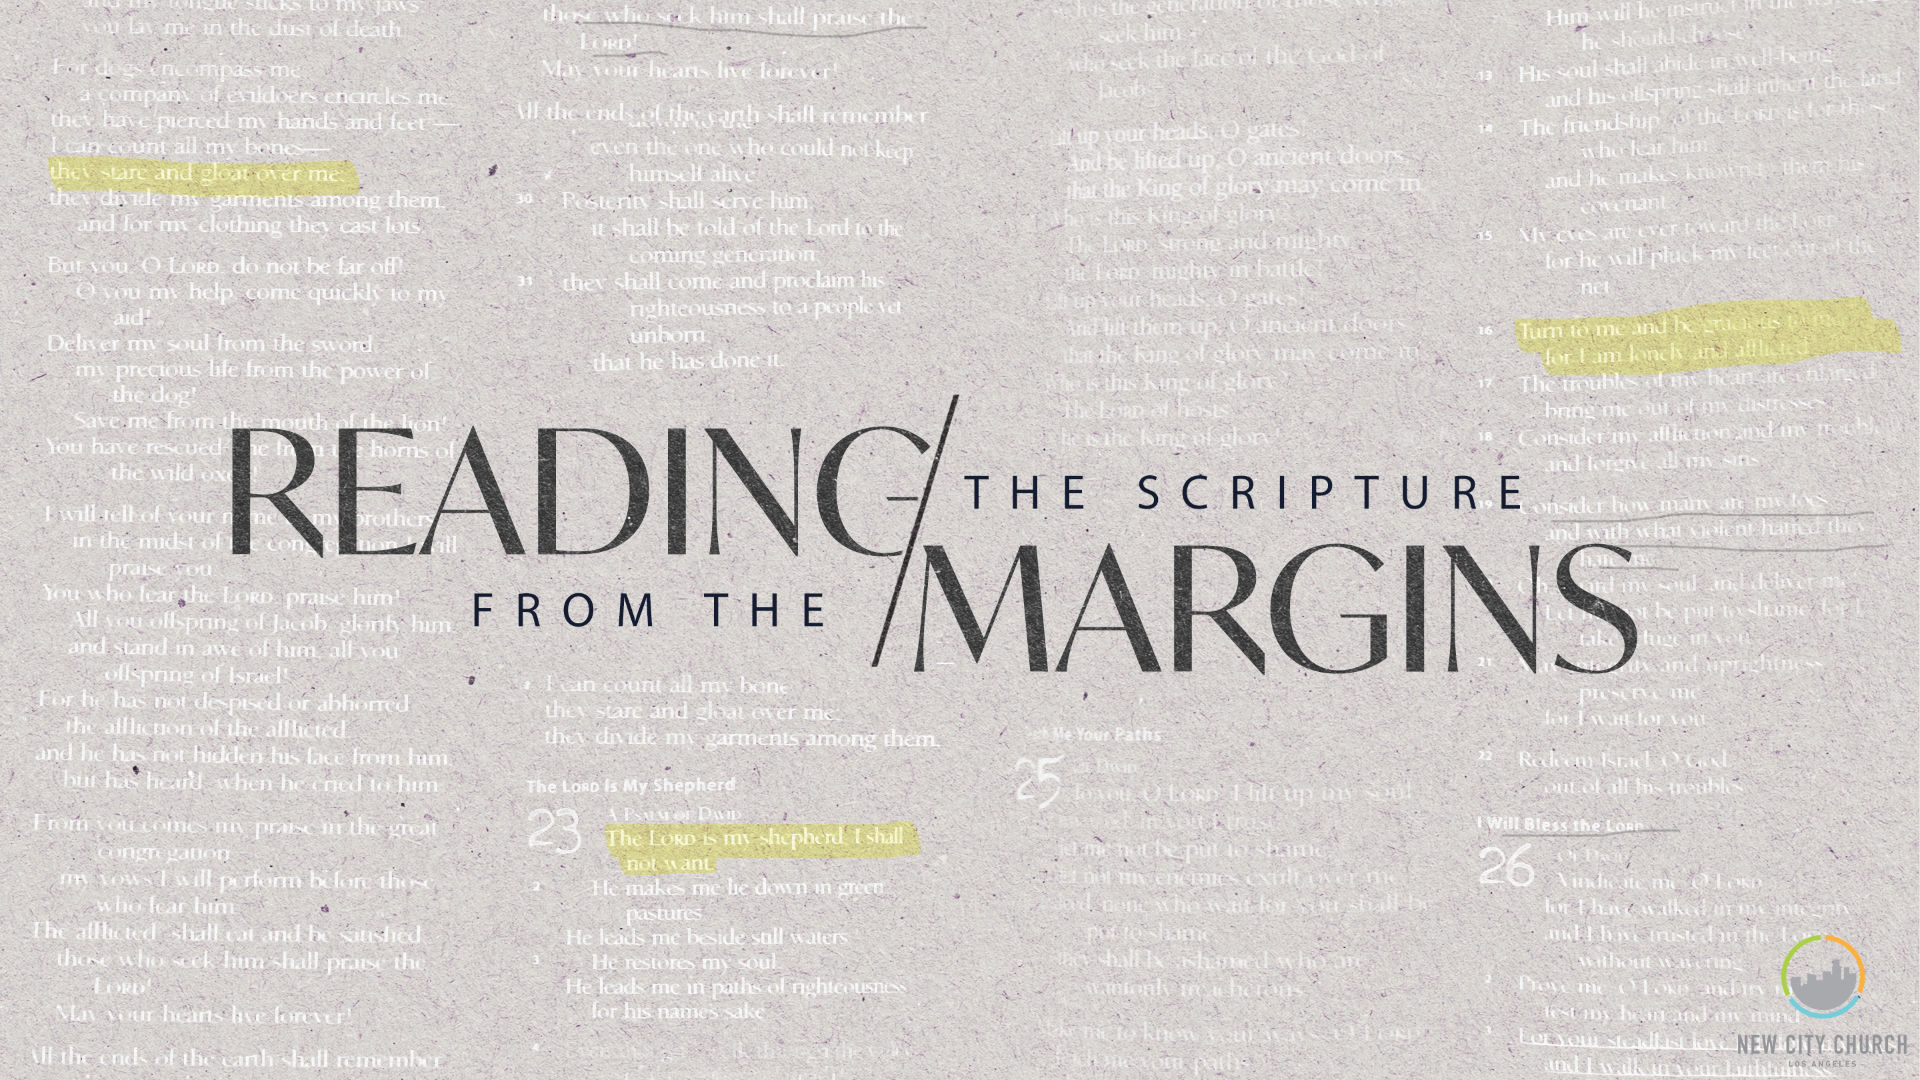 Reading the Scripture from the Margins